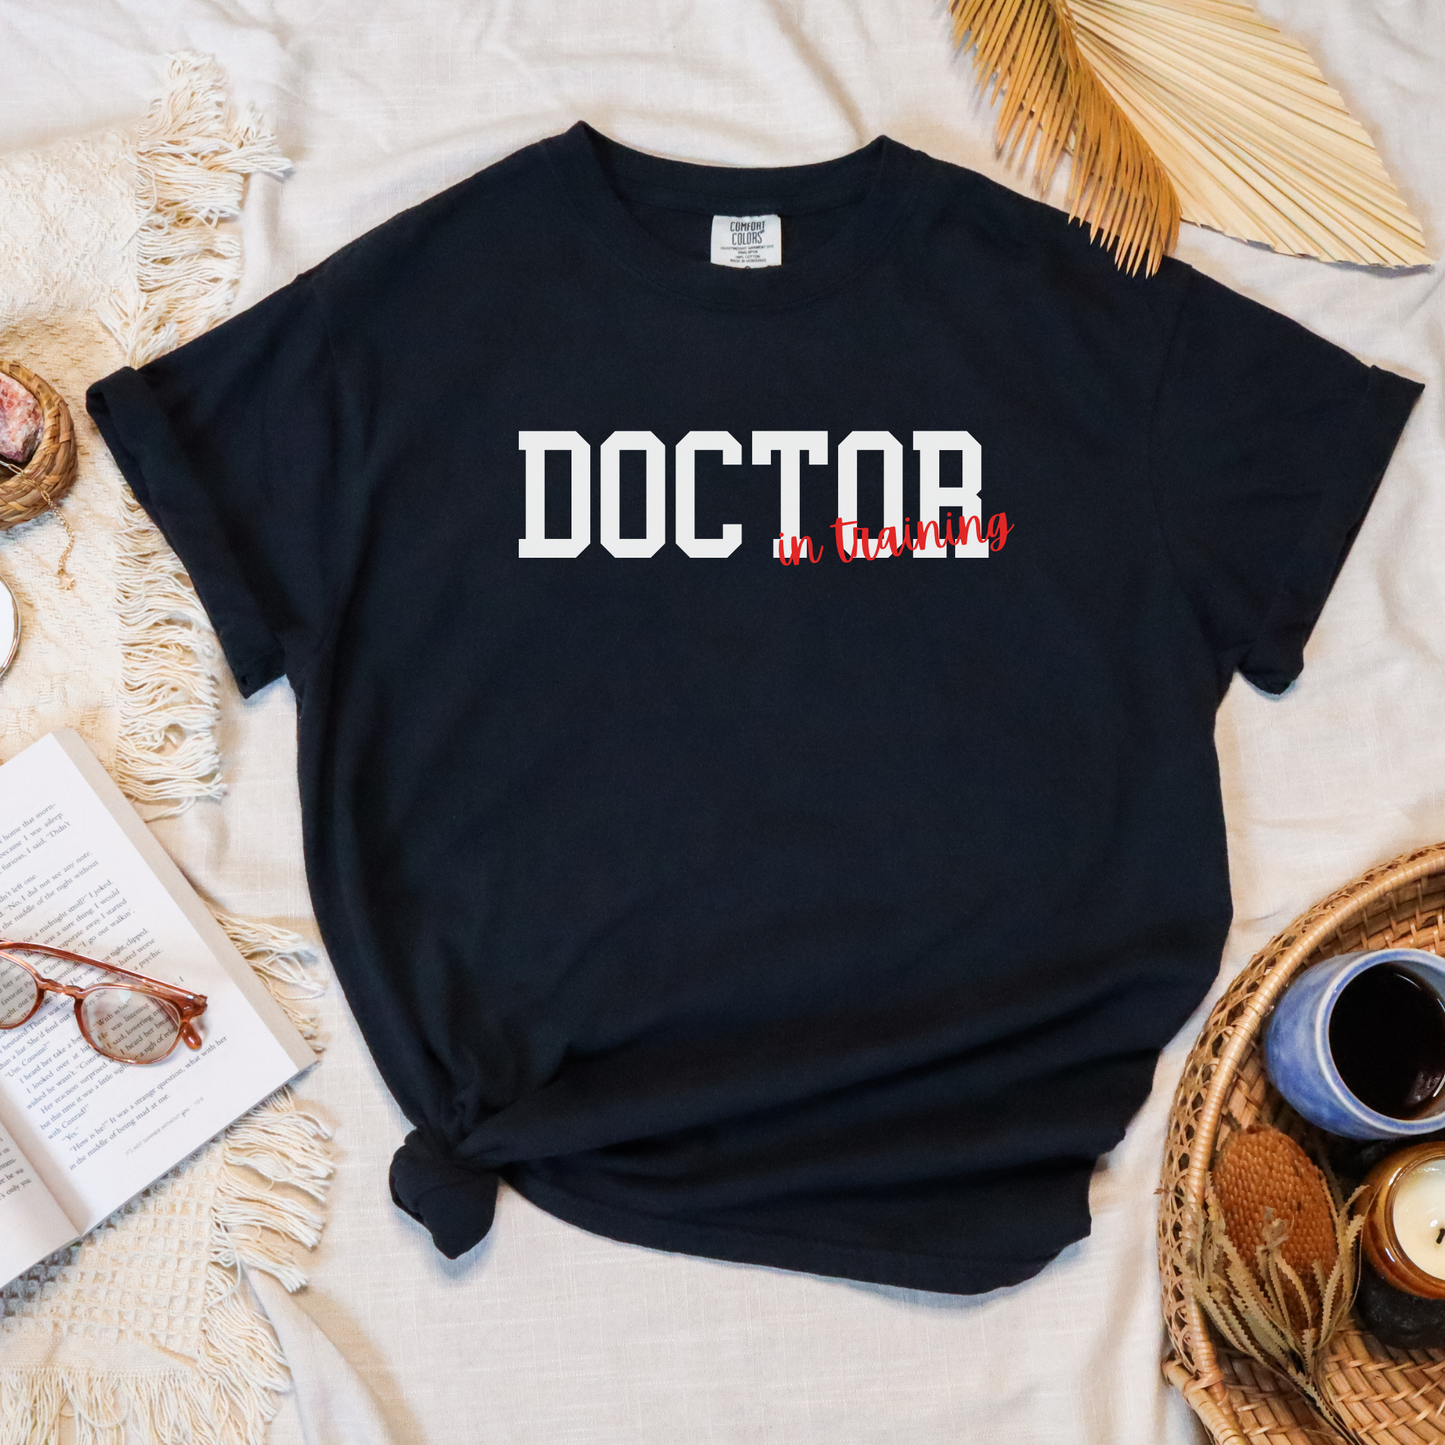 Doctor in Training T-Shirt, Medical Med School Shirt, Almost a Doctor Tee, Med School Gifts, DNP PHD MD Grad Shirt, College Grad Gift